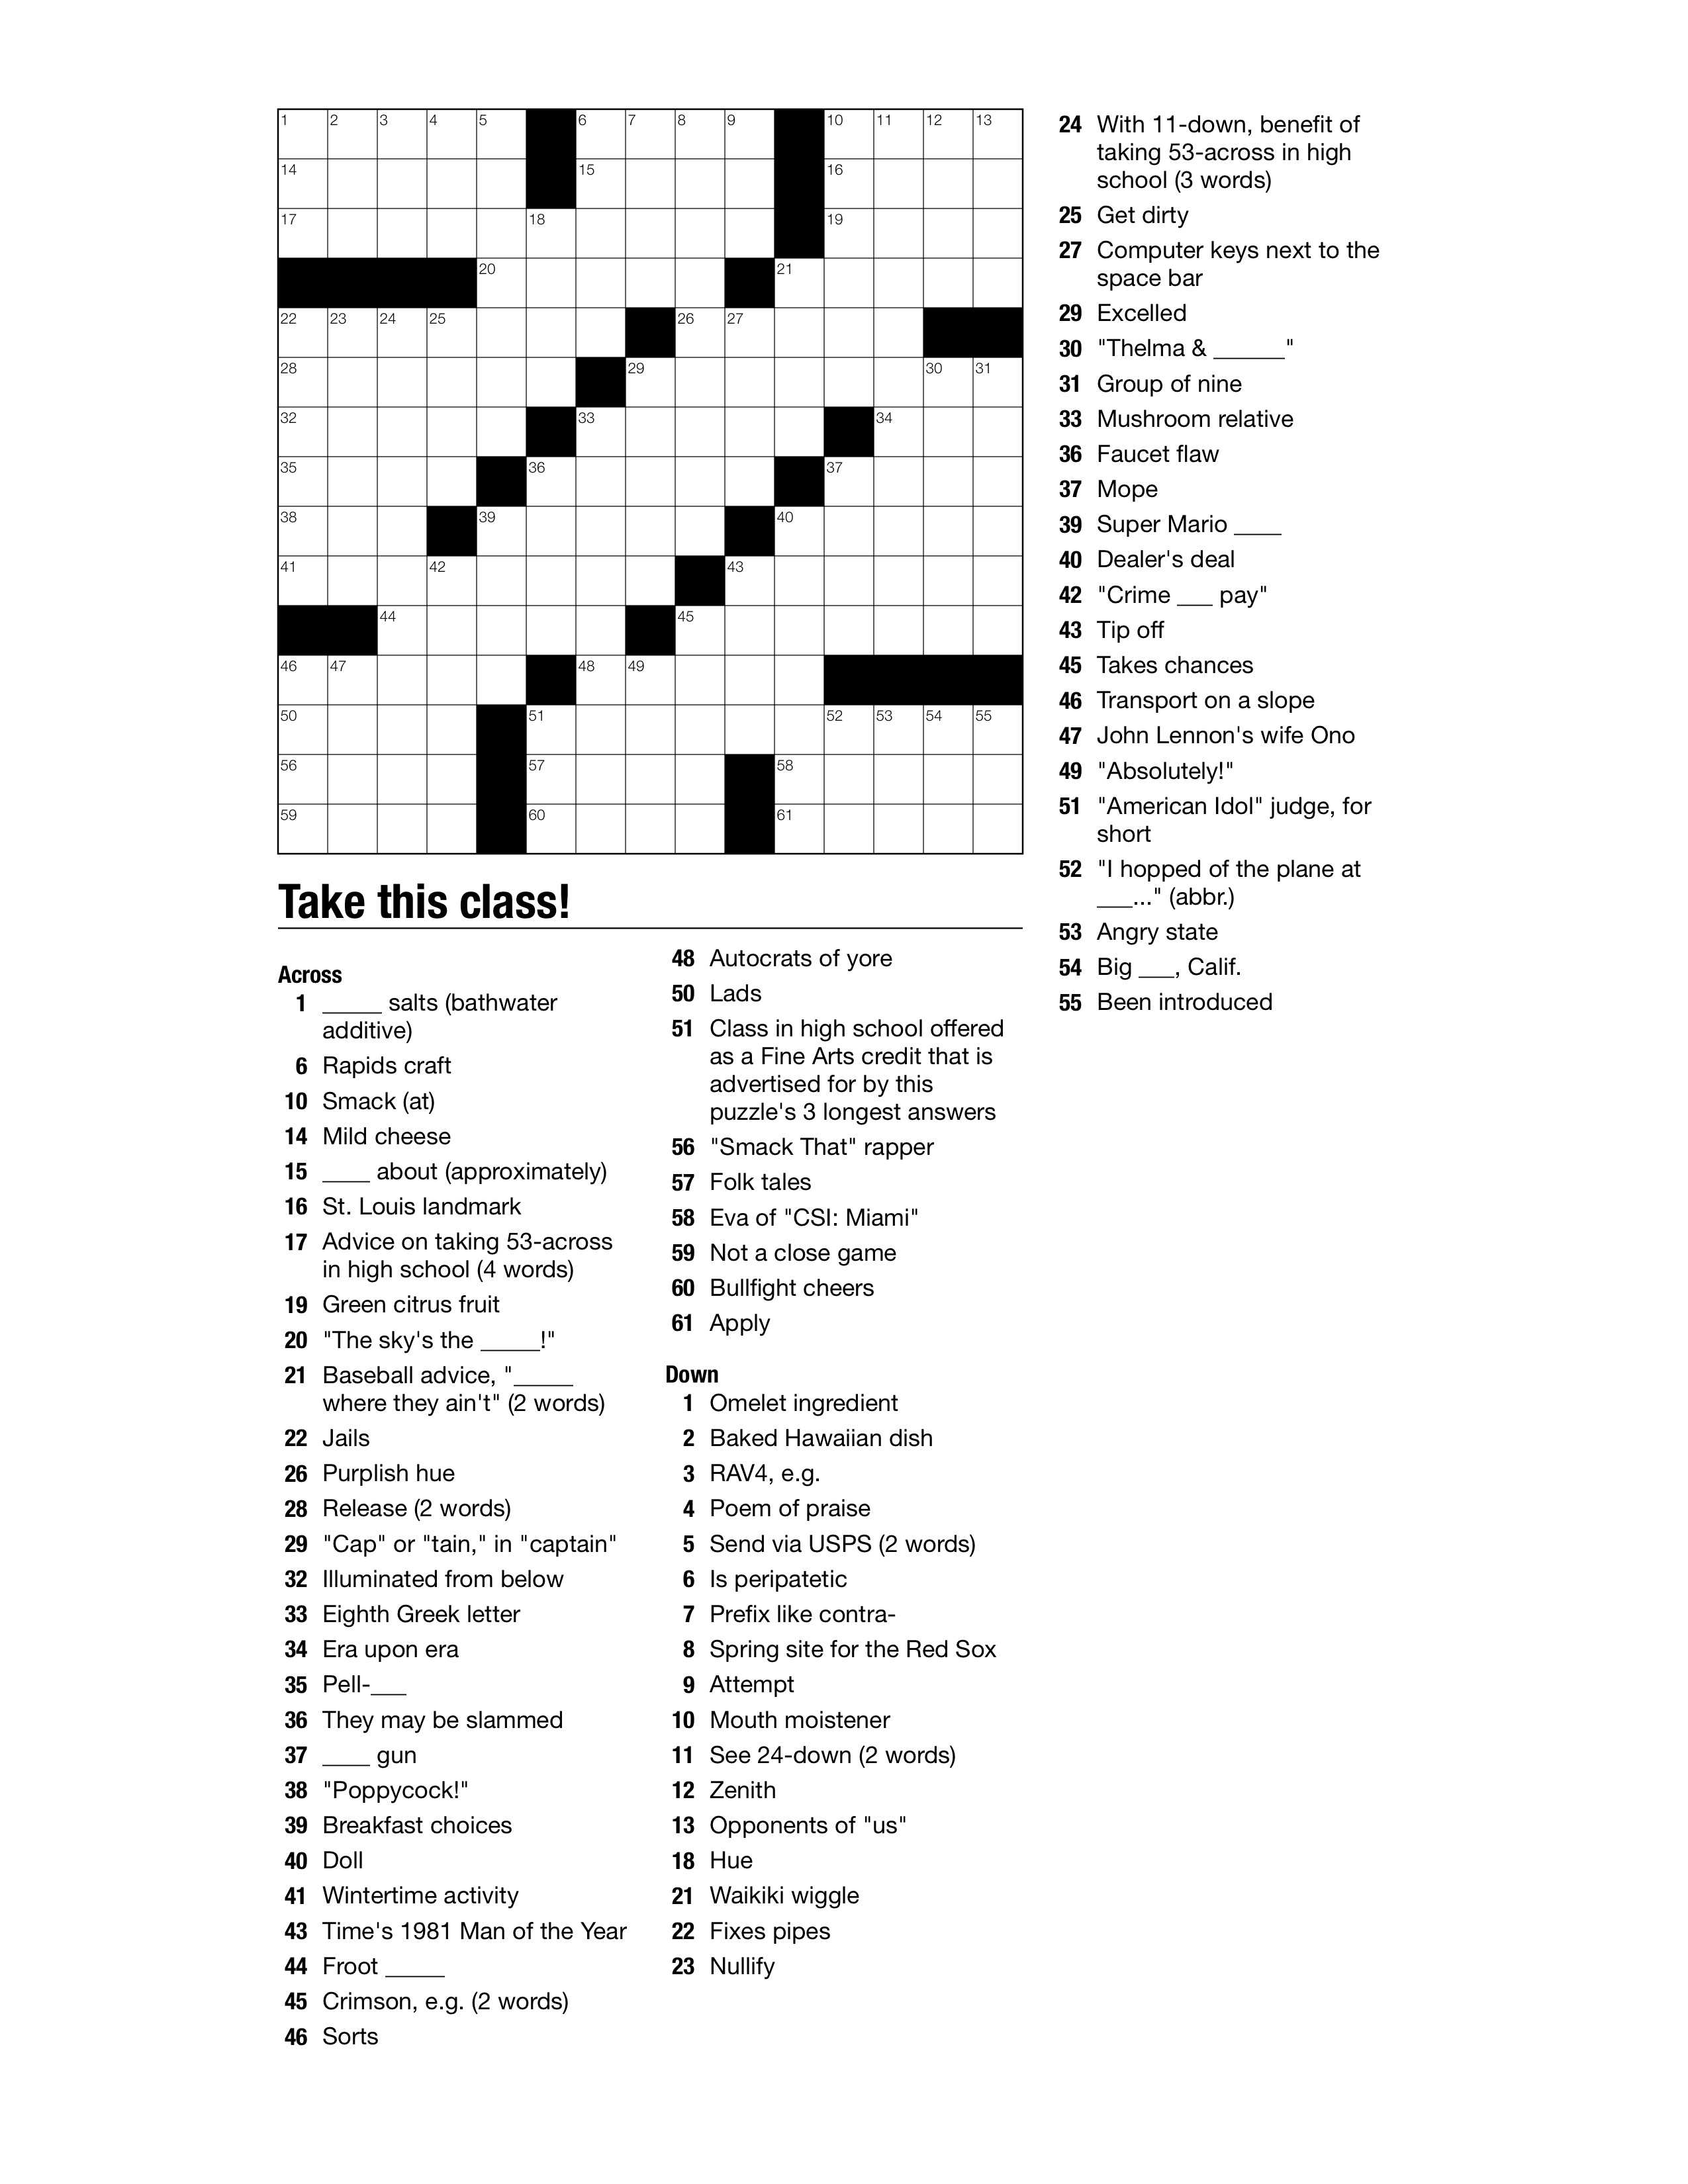 daily crossword puzzles online free